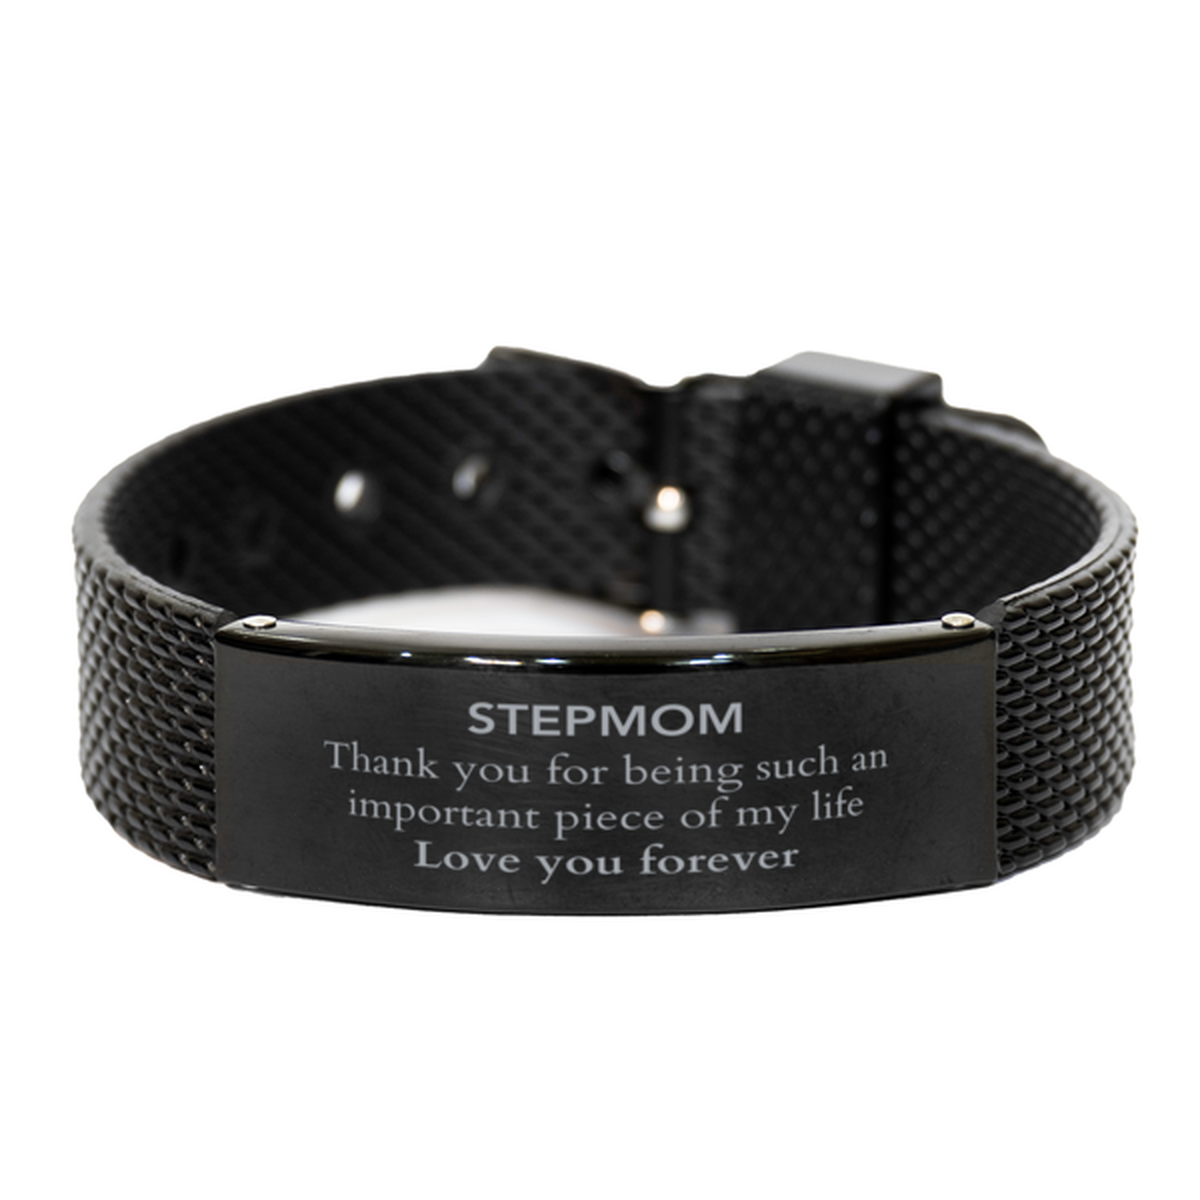 Appropriate Stepmom Black Shark Mesh Bracelet Epic Birthday Gifts for Stepmom Thank you for being such an important piece of my life Stepmom Christmas Mothers Fathers Day